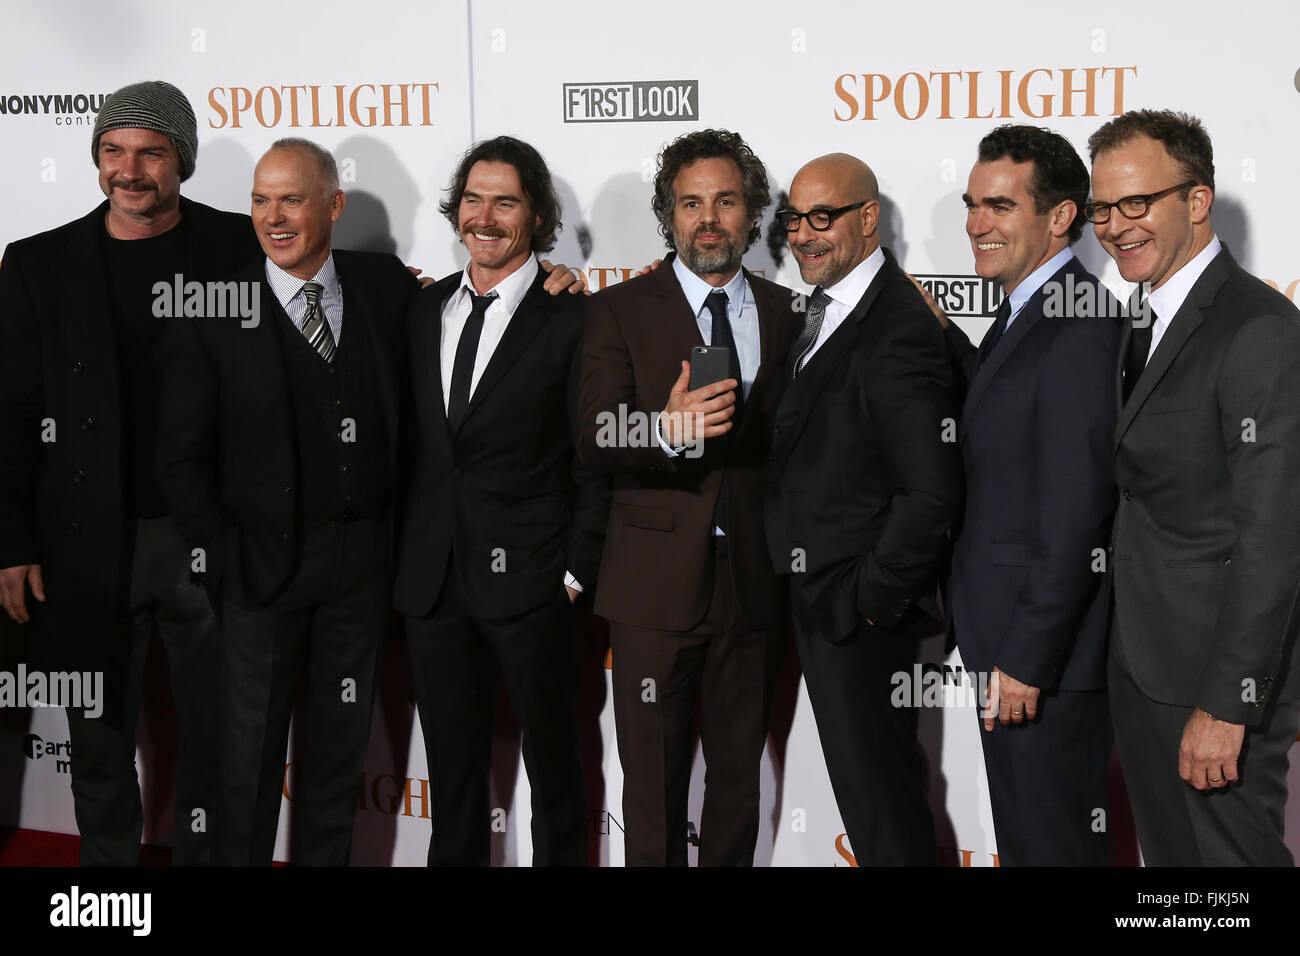 Liev Schreiber, Michael Keaton, Billy Crudup, Mark Ruffalo, Stanley Tucci, Brian d'Arcy James et Tom McCarthy. Banque D'Images